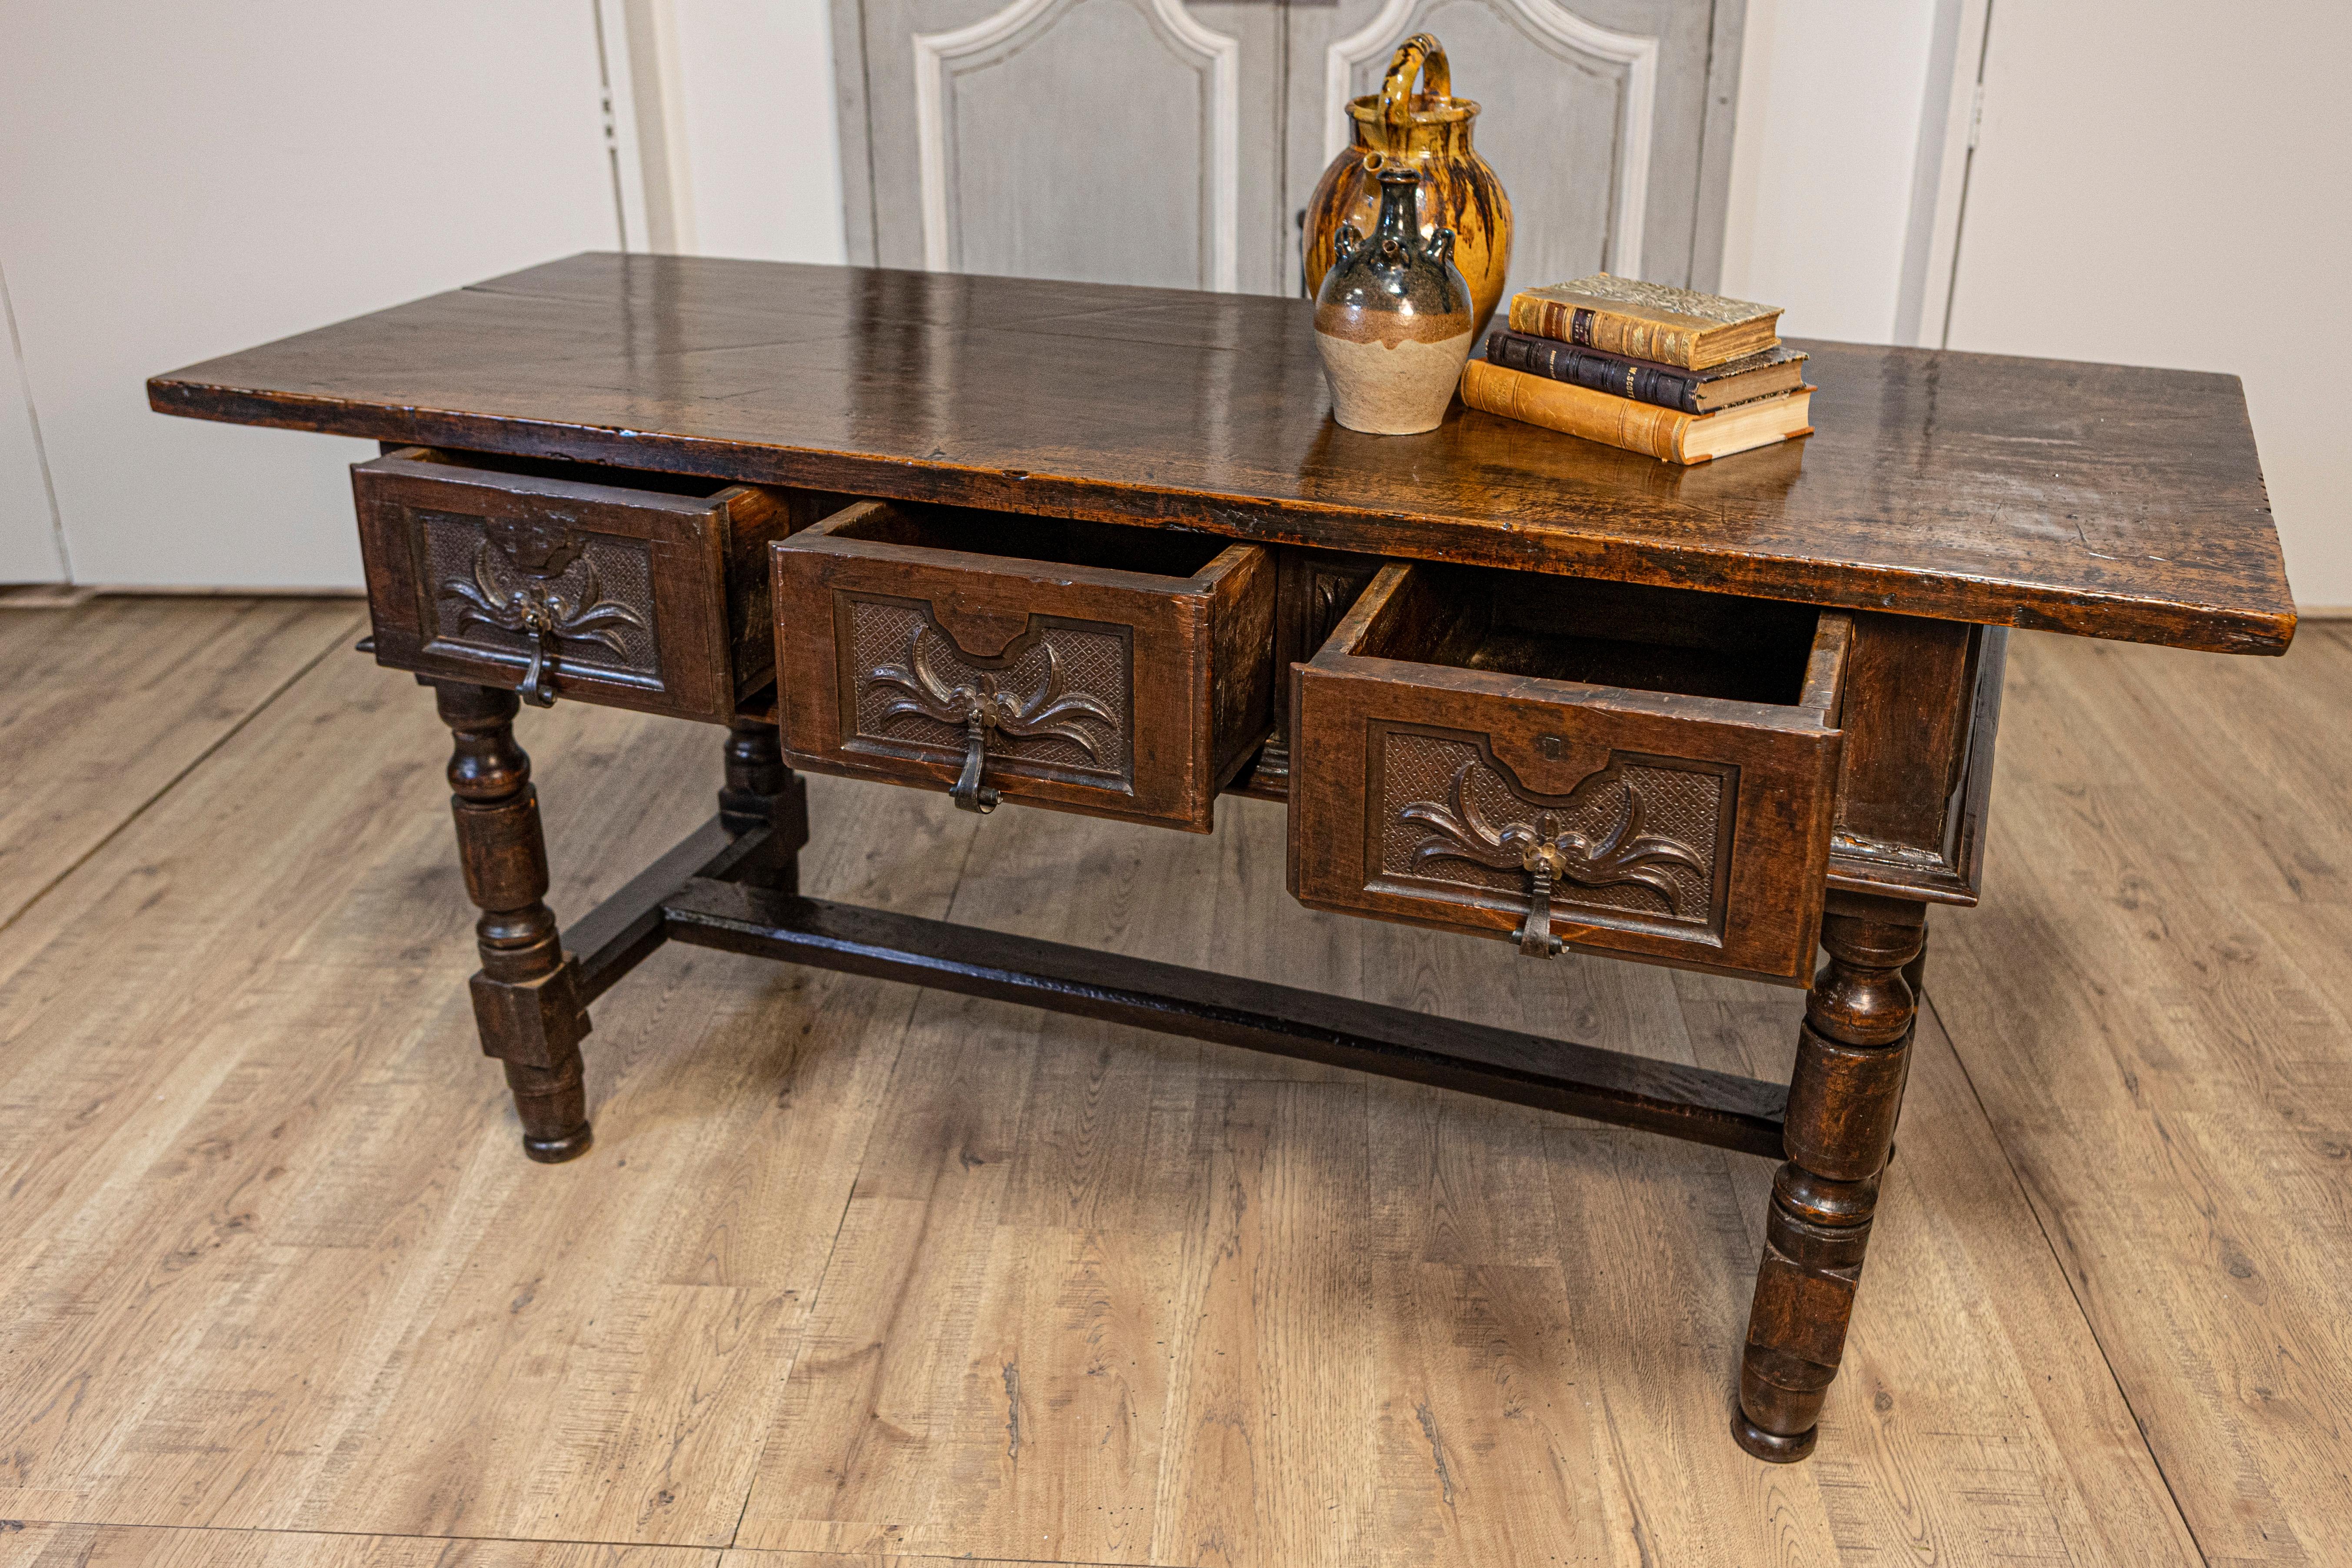 Spanish Baroque 17th Century Walnut Table with Carved Drawers and Turned Legs For Sale 13